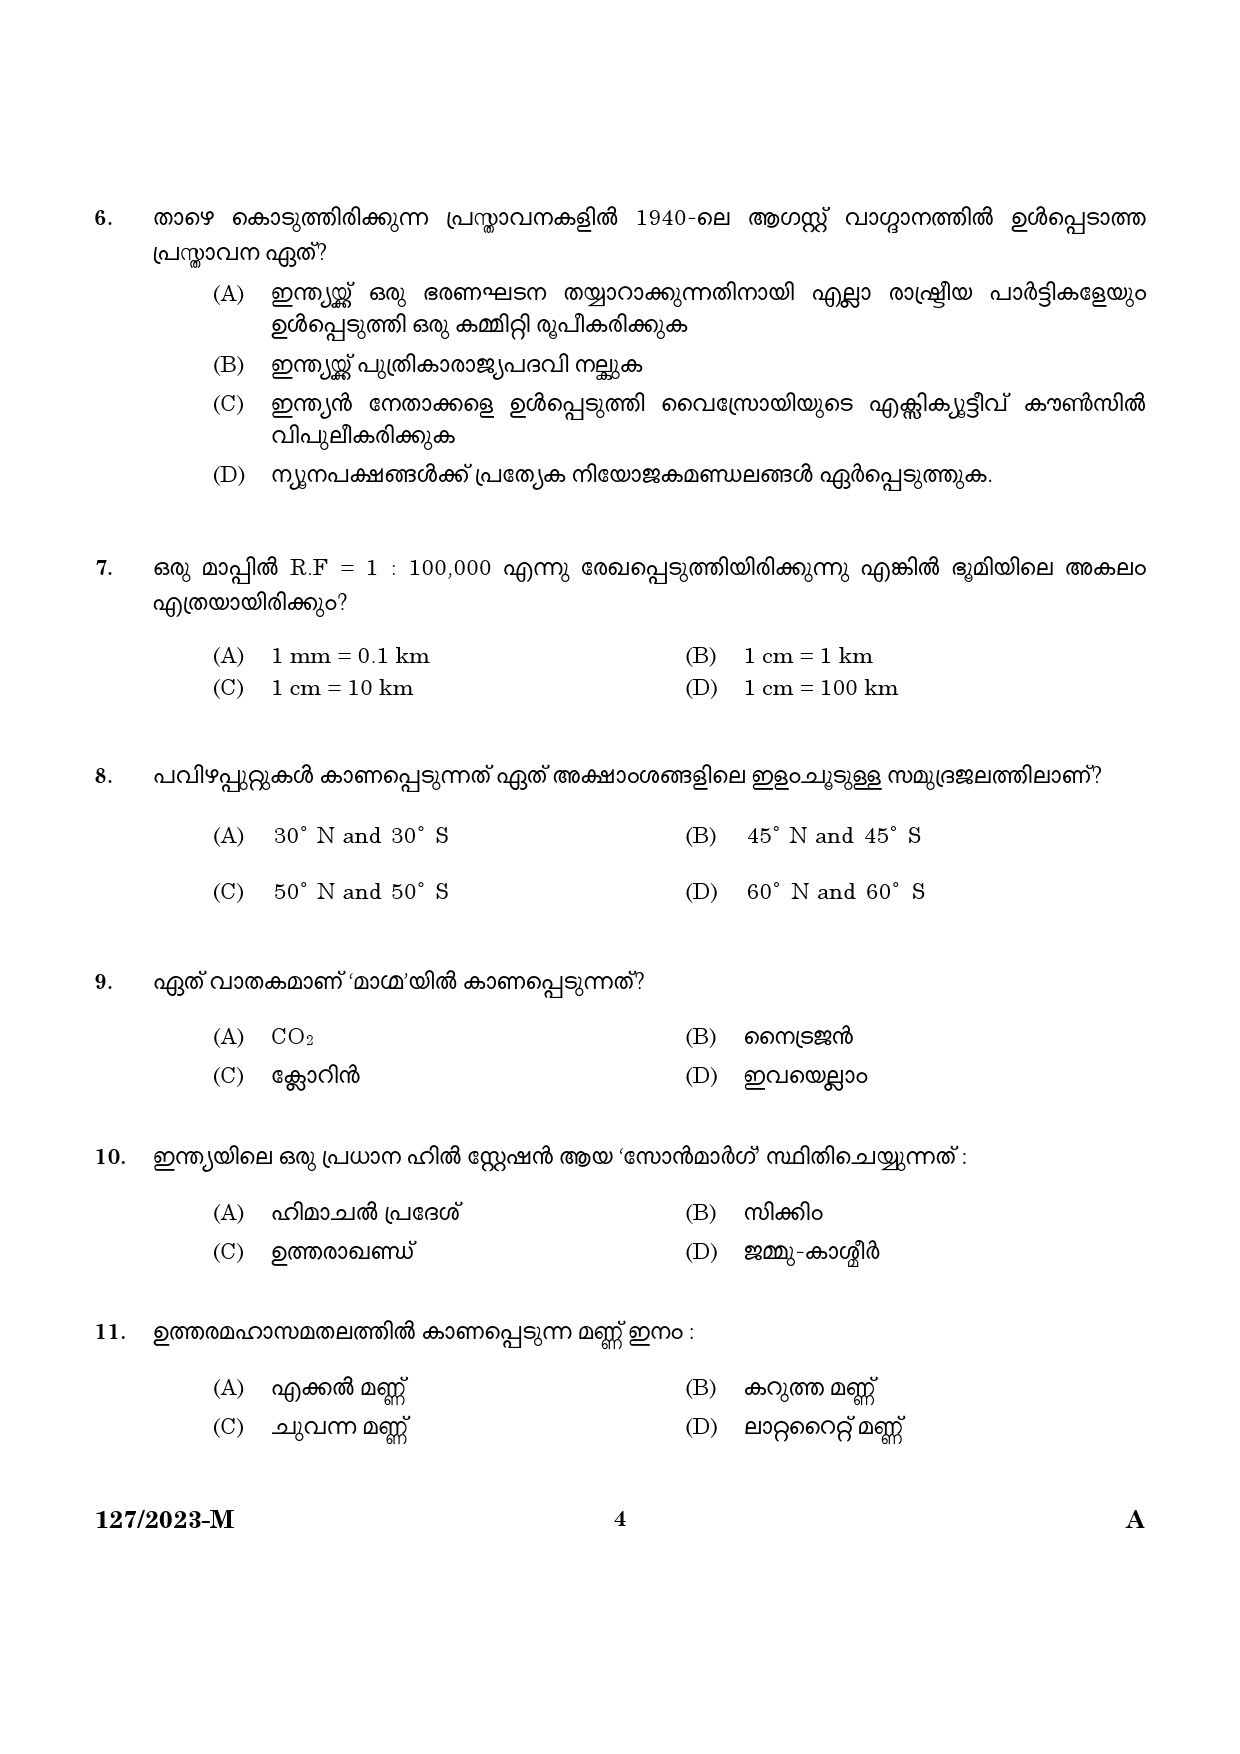 KPSC Police Constable Armed Police Battalion Malayalam Exam 2023 Code 1272023 M 2